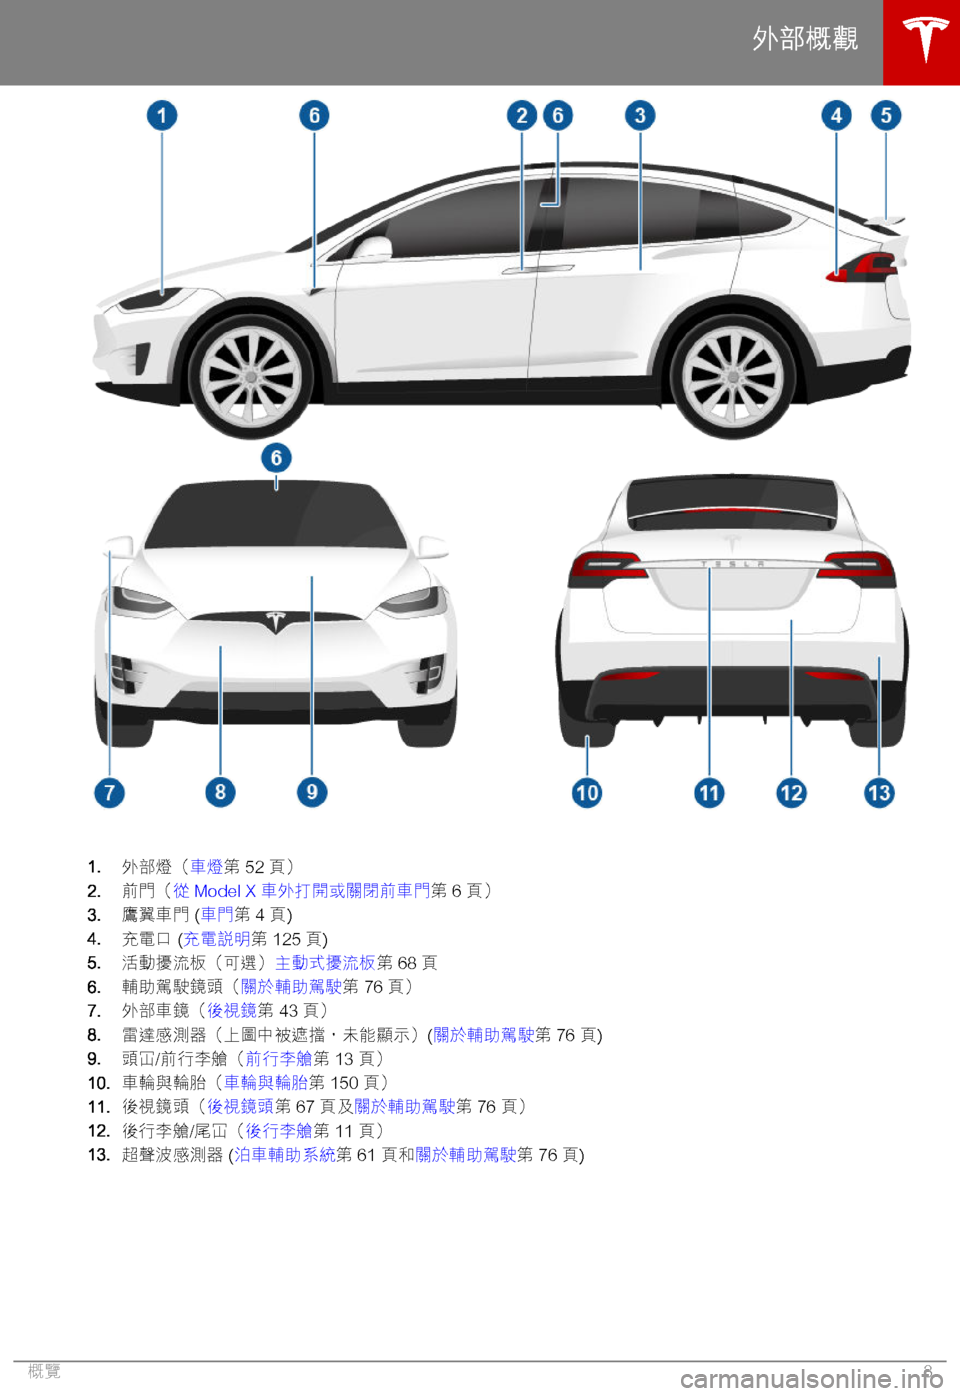 TESLA MODEL X 2018  車主手冊 (in Chinese Traditional) �1�."M*